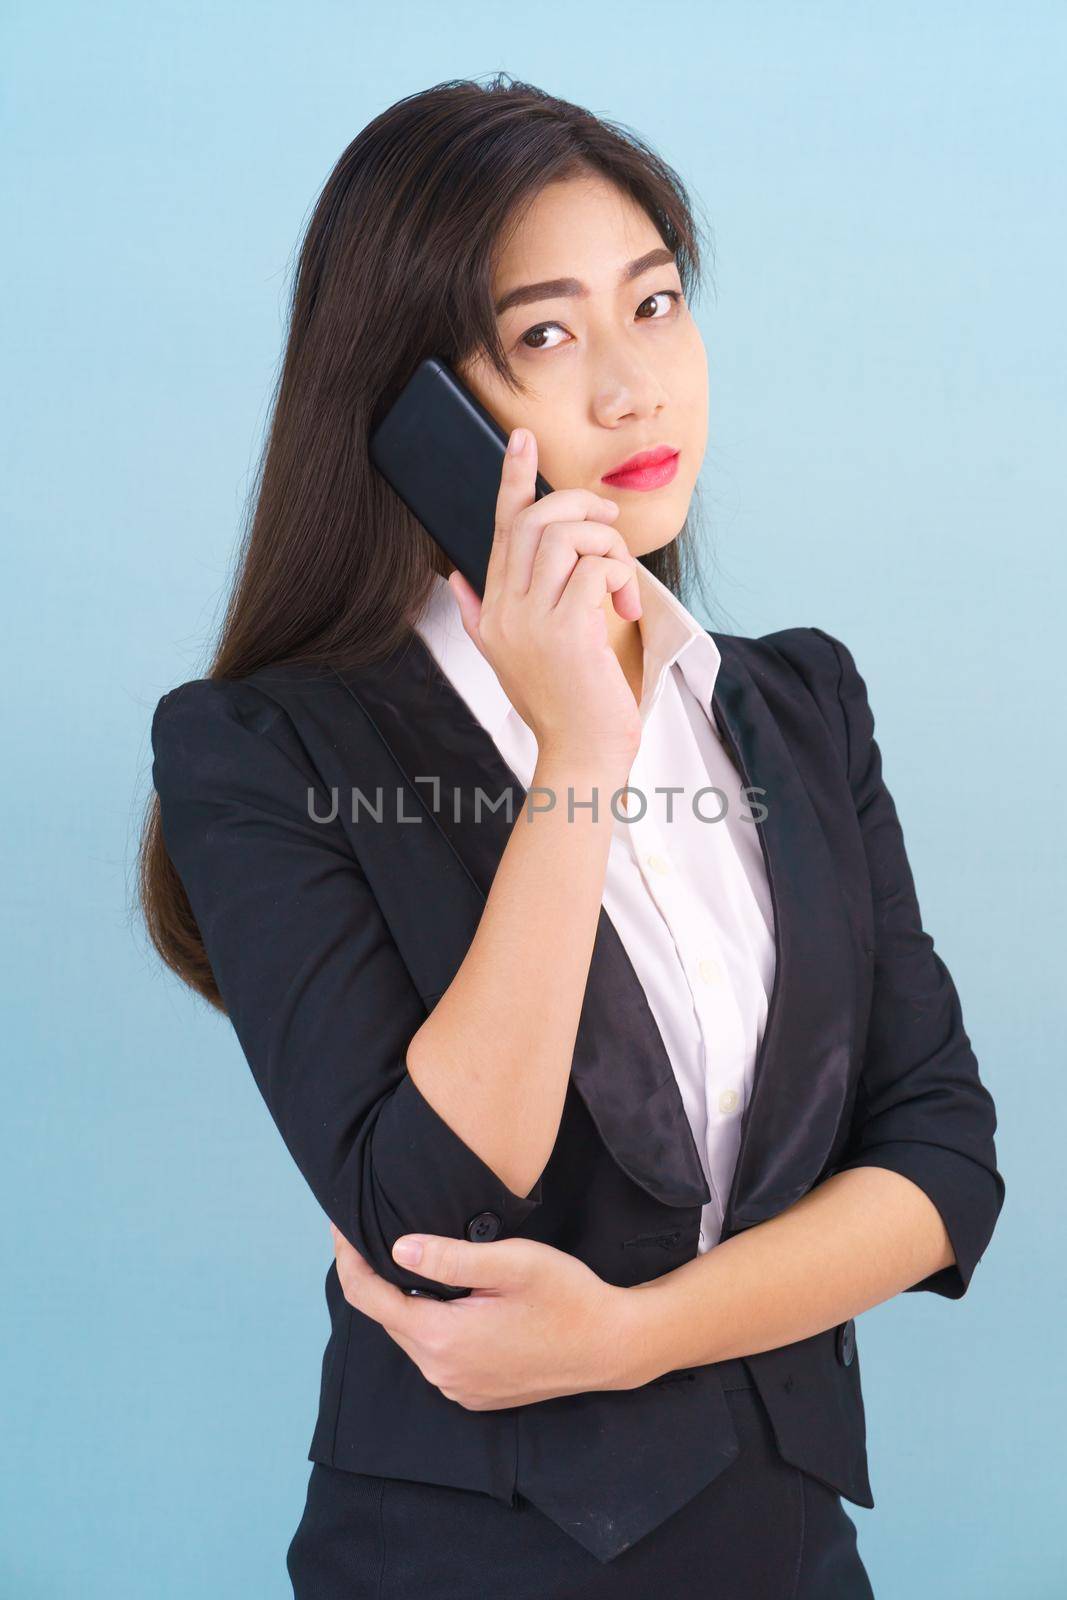 Women in suit holding smartphone against blue background by stoonn